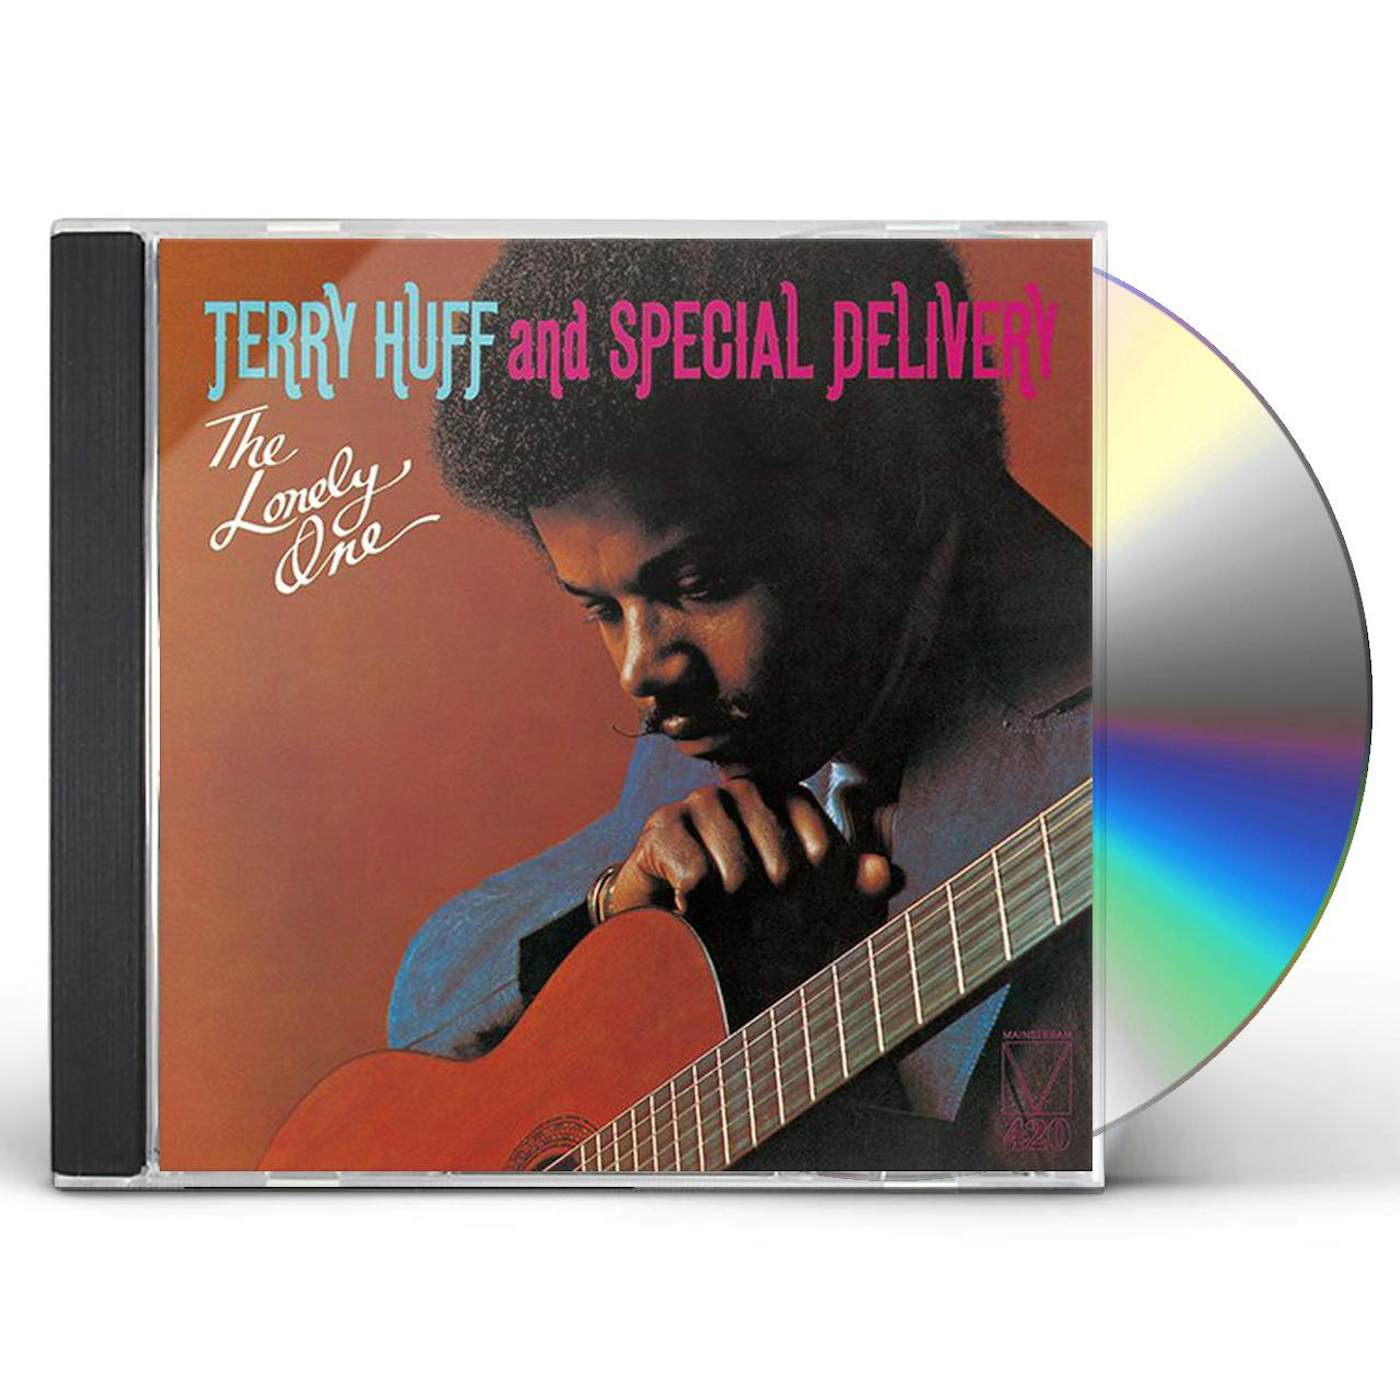 Terry Huff & Special Delivery LONELY ONE CD